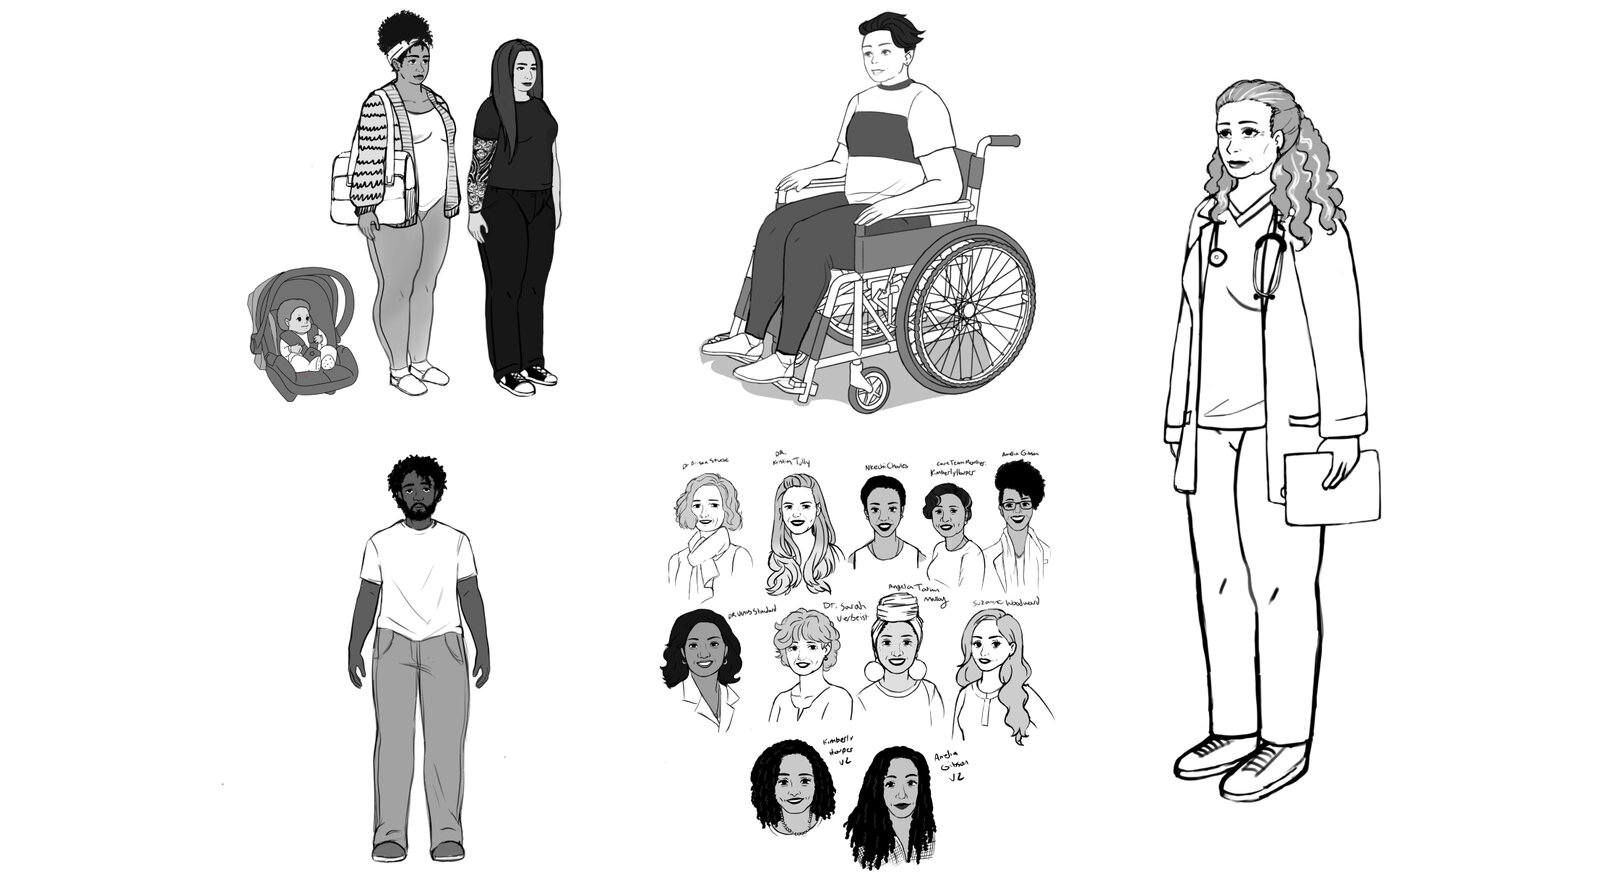 Sketches of characters in the video